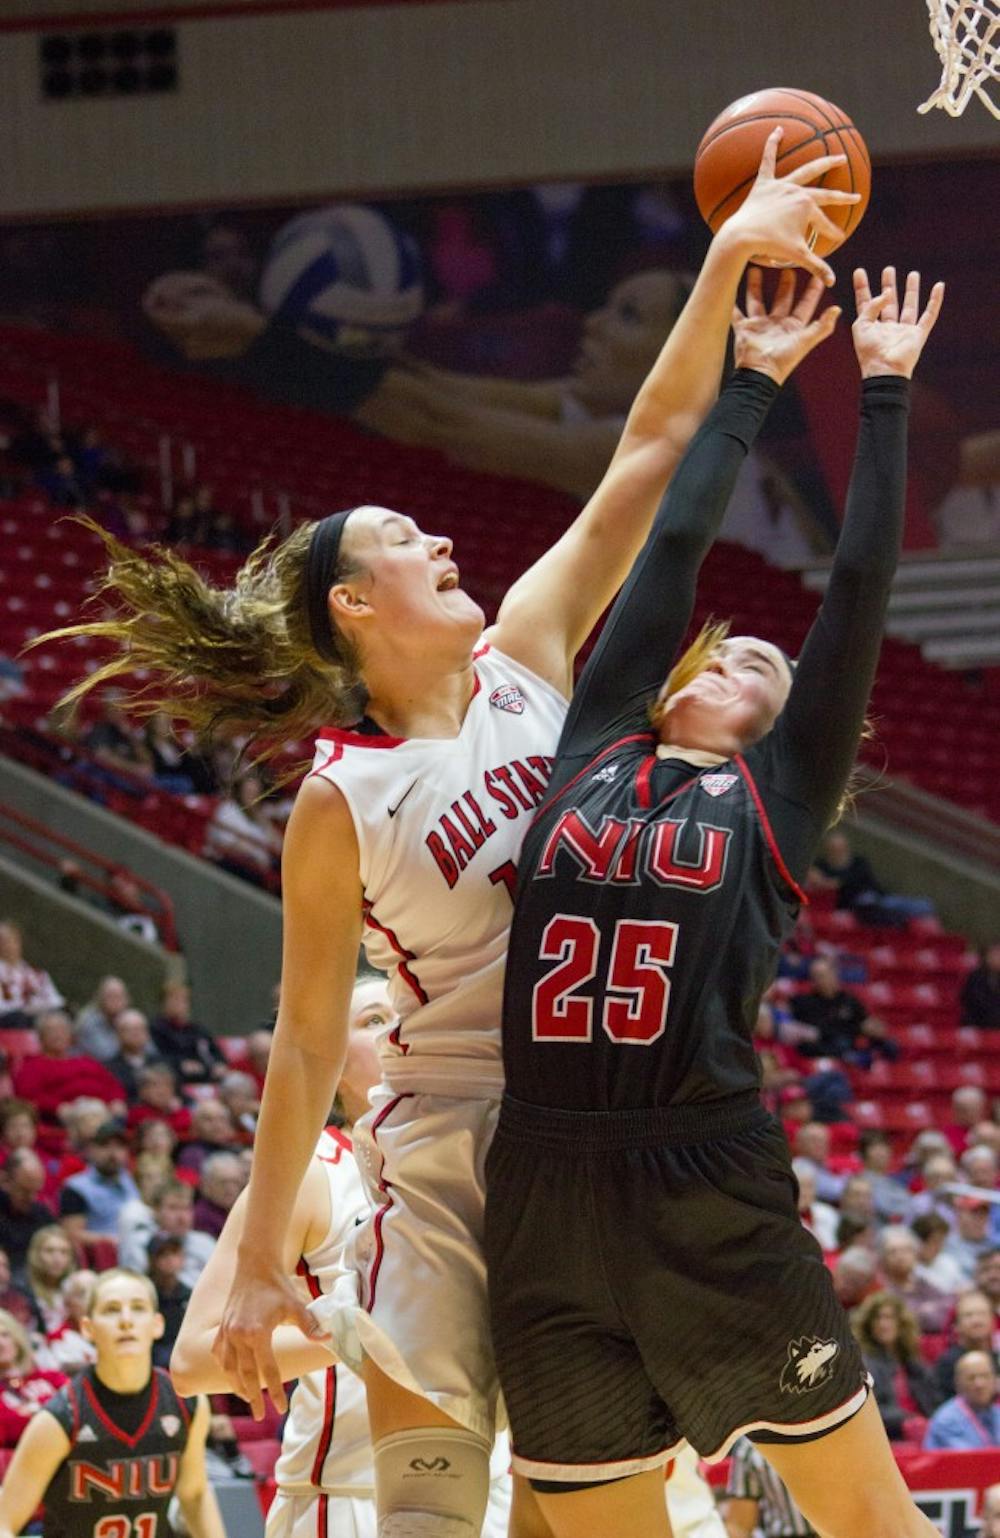 Senior Renee Bennett uses her height to steal a rebound from an opponent during the January 28th game against Northern Illinois at Worthern Arena.